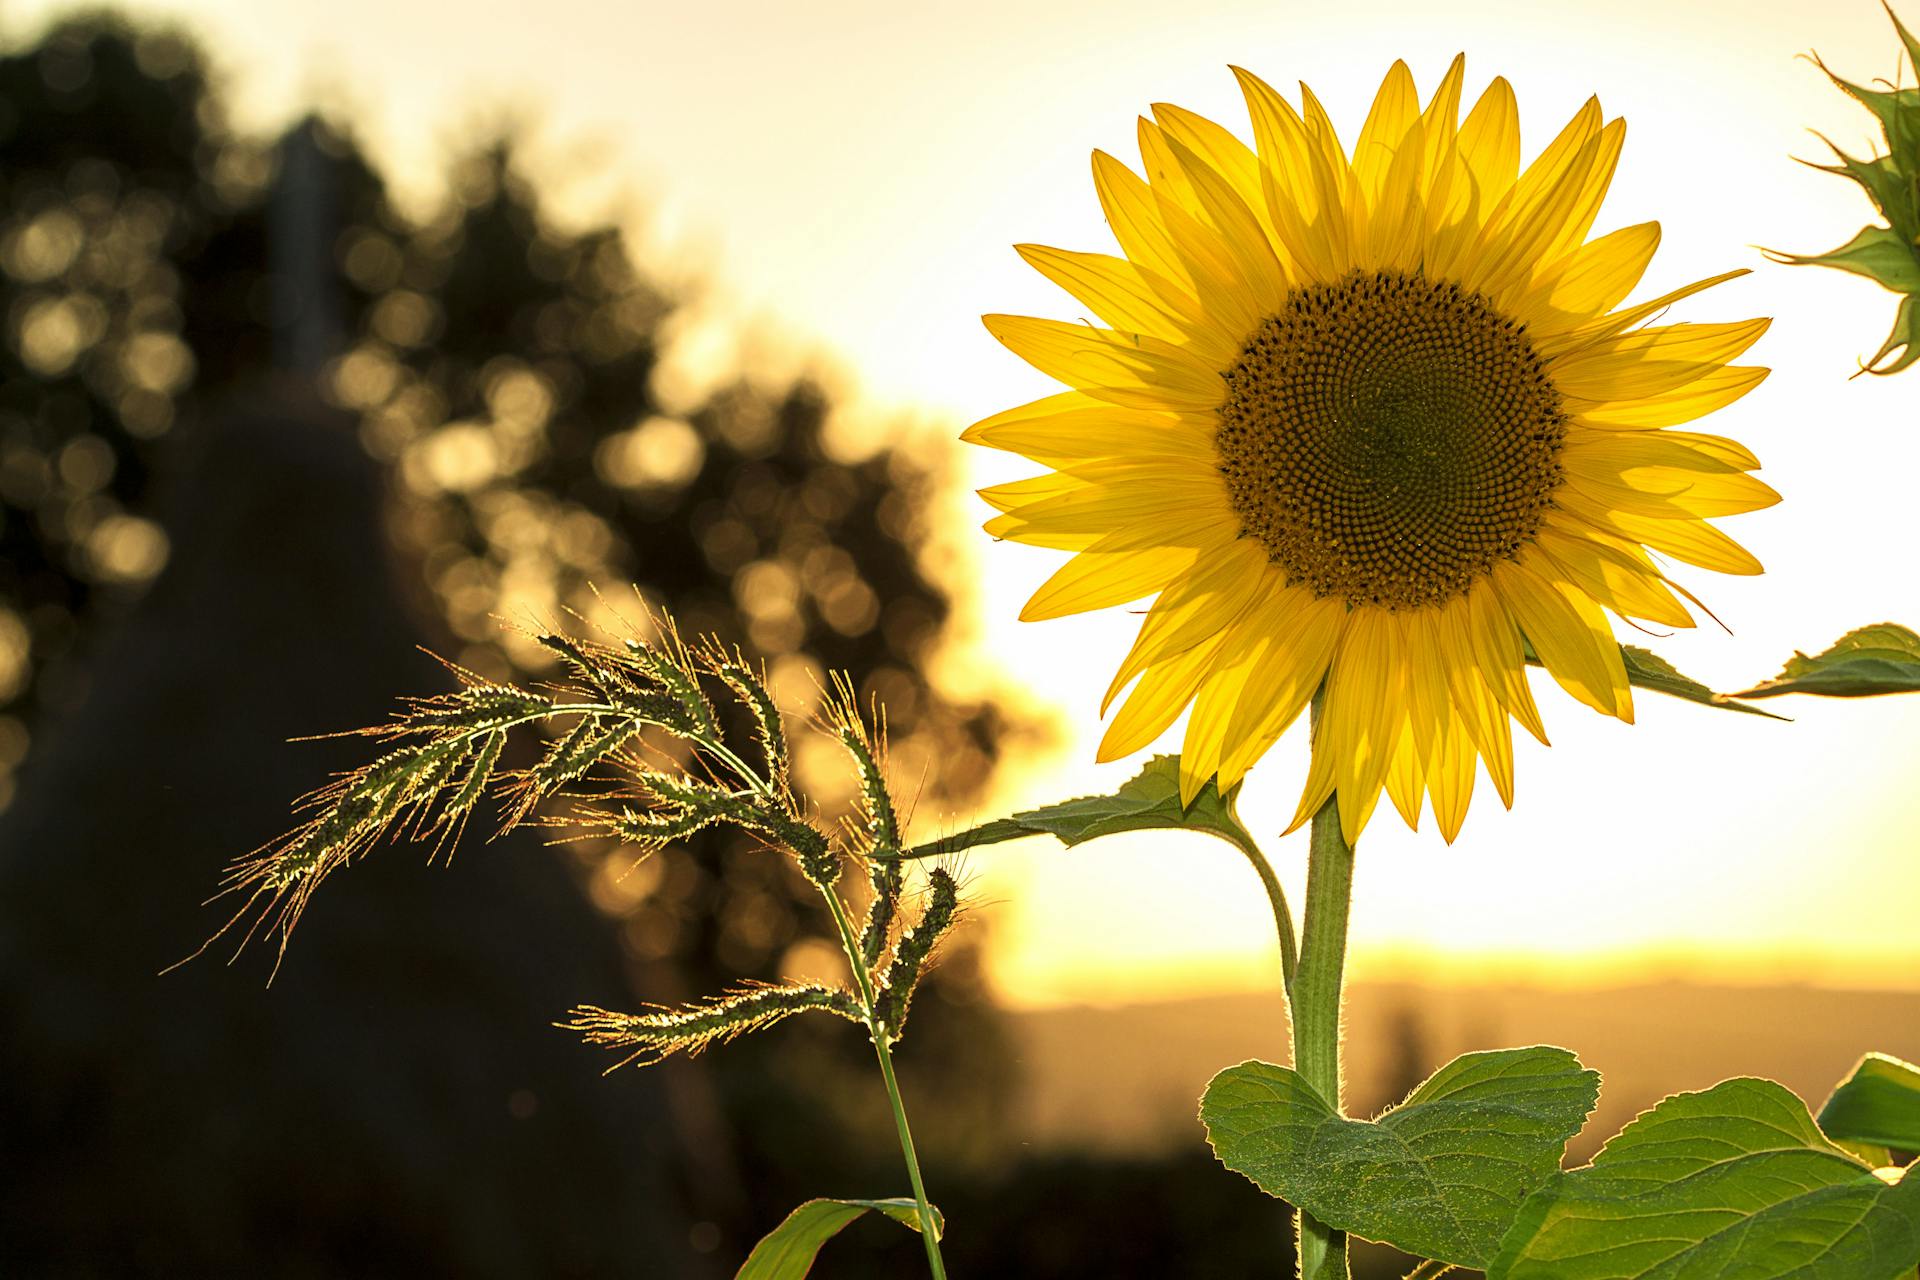 A sunflower blooming during sunset | Source: Pexels